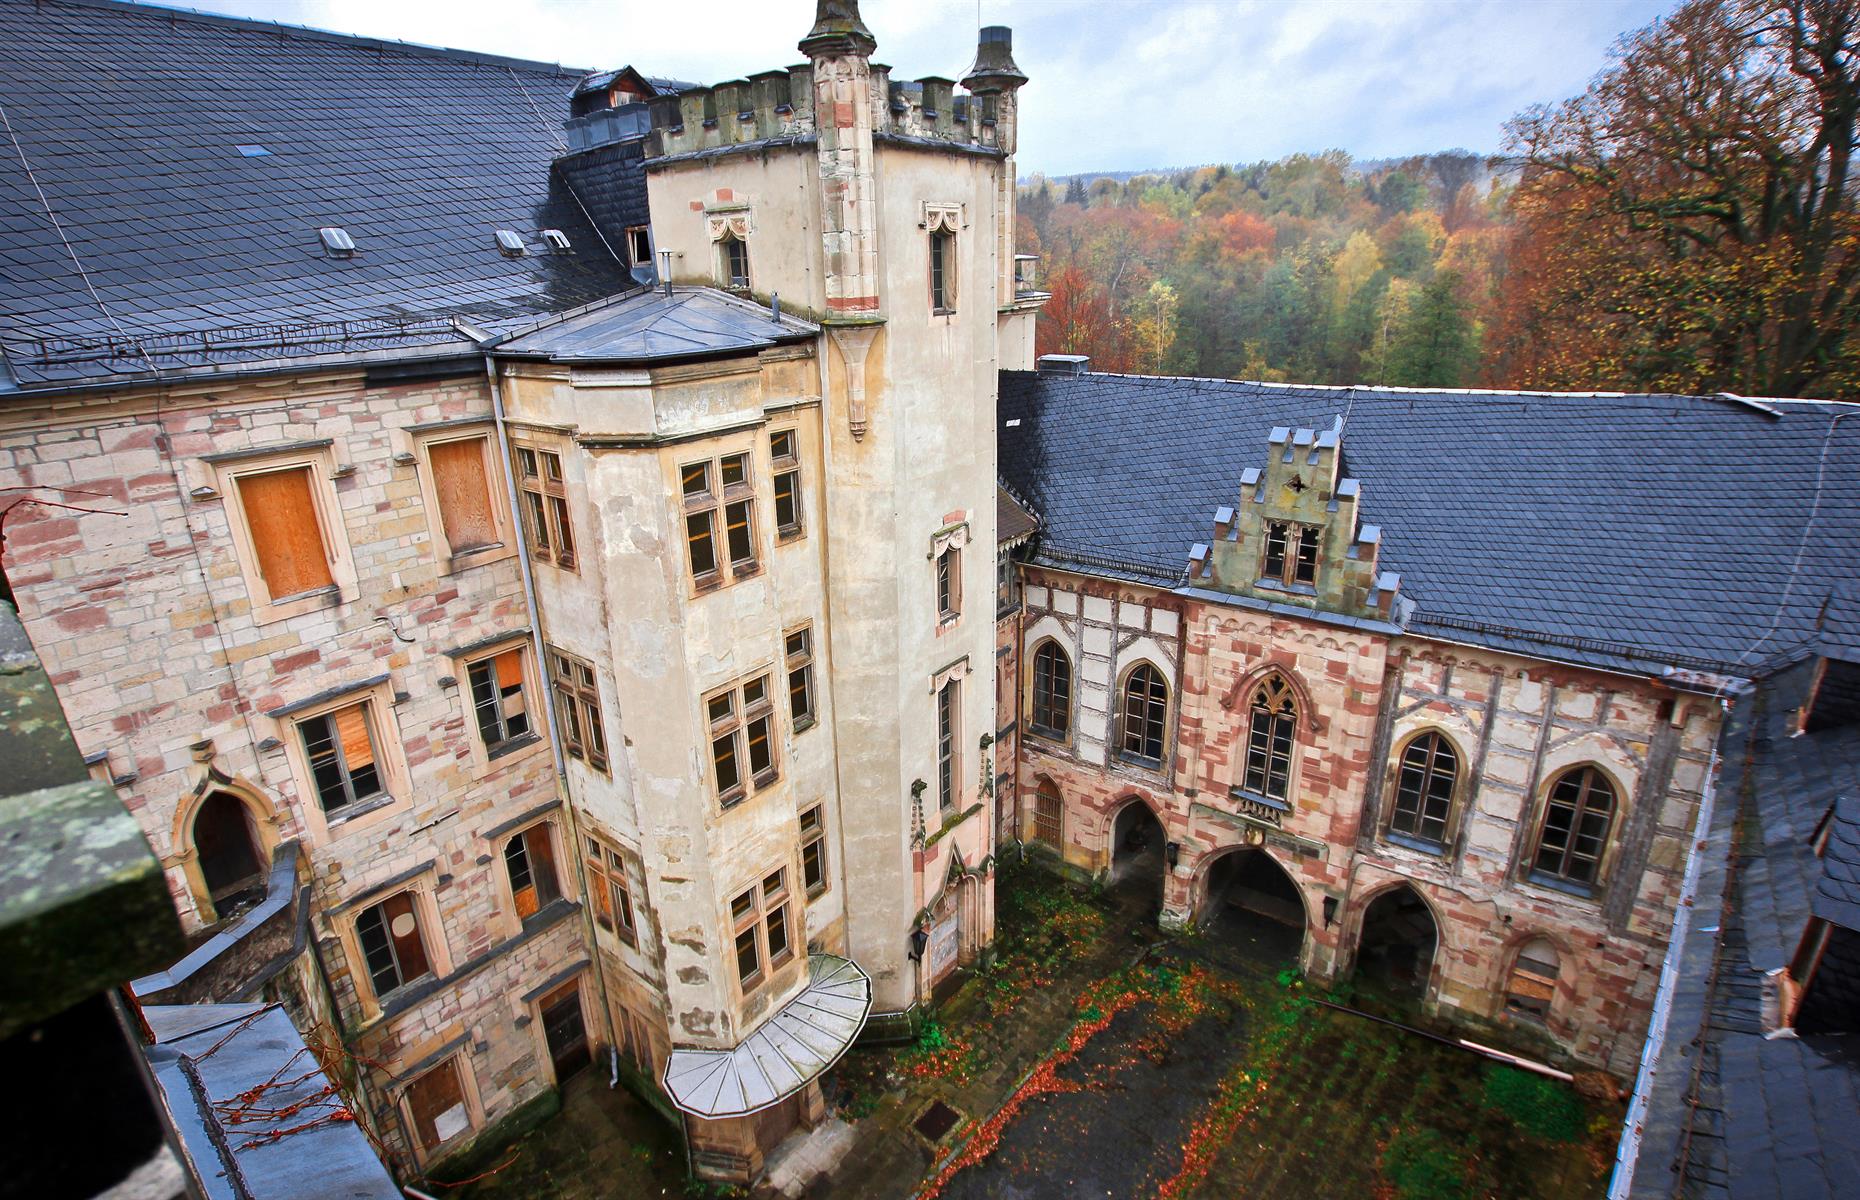 <p>The house stayed in Prince Albert's family up until the end of the Second World War, after which it fell under the control of the East German state and was used as variously a military hospital and as a government venue and showpiece hotel. After reunification, the castle was recognized as a historic monument in 1992 by the State of Thuringia. It was bought and sold by various travel companies in the intervening years and has since been left to wrack and ruin.</p>